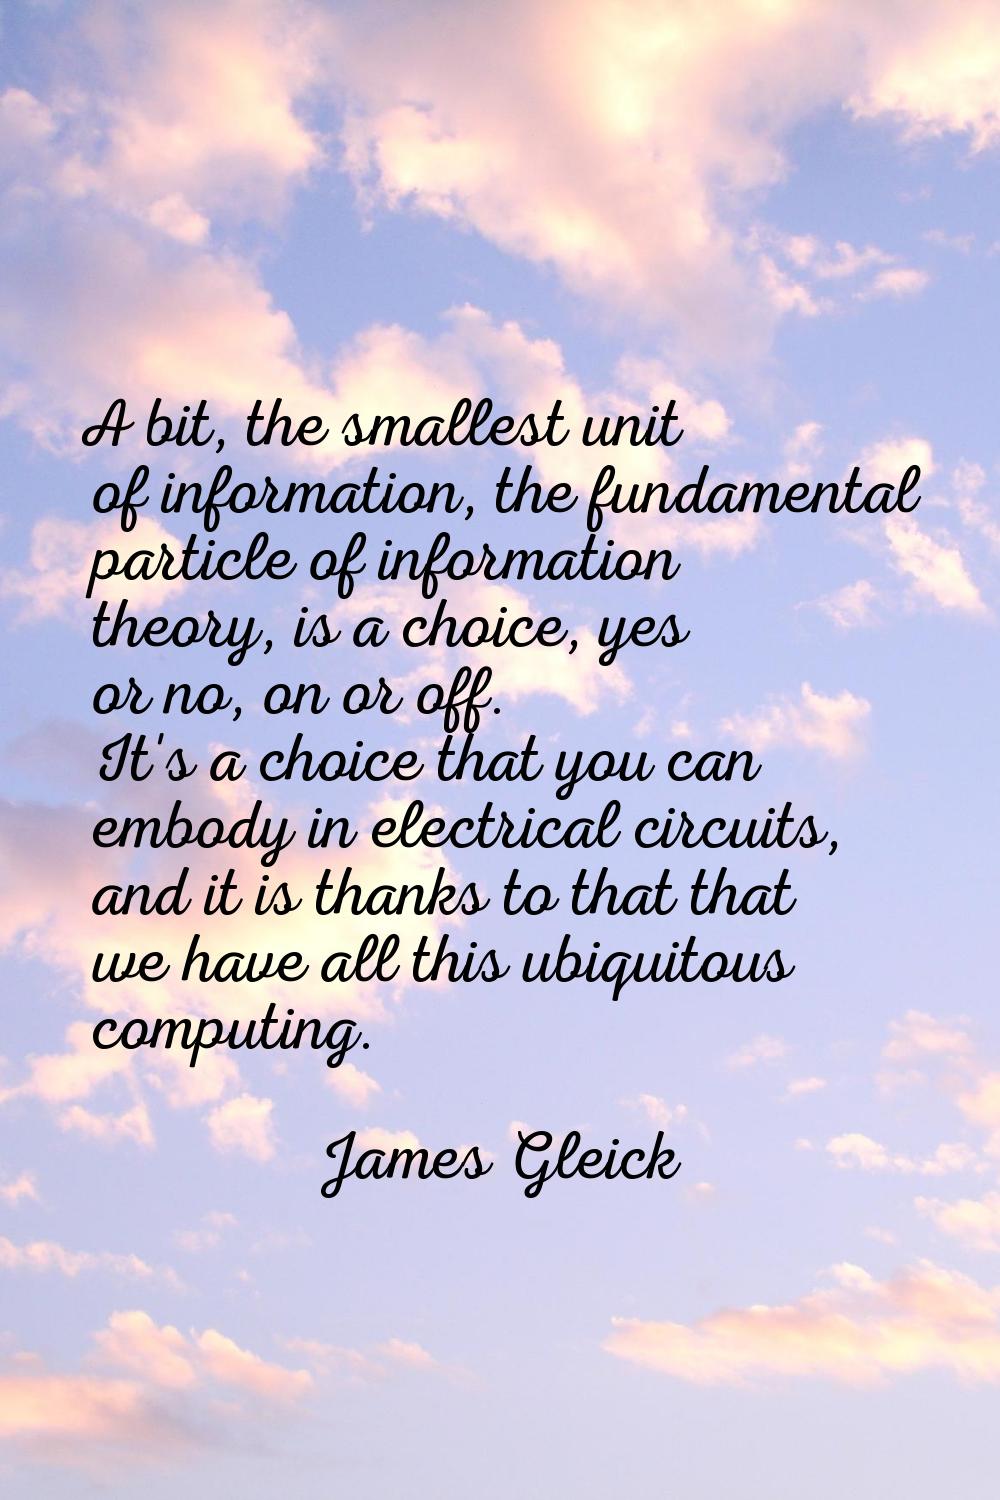 A bit, the smallest unit of information, the fundamental particle of information theory, is a choic